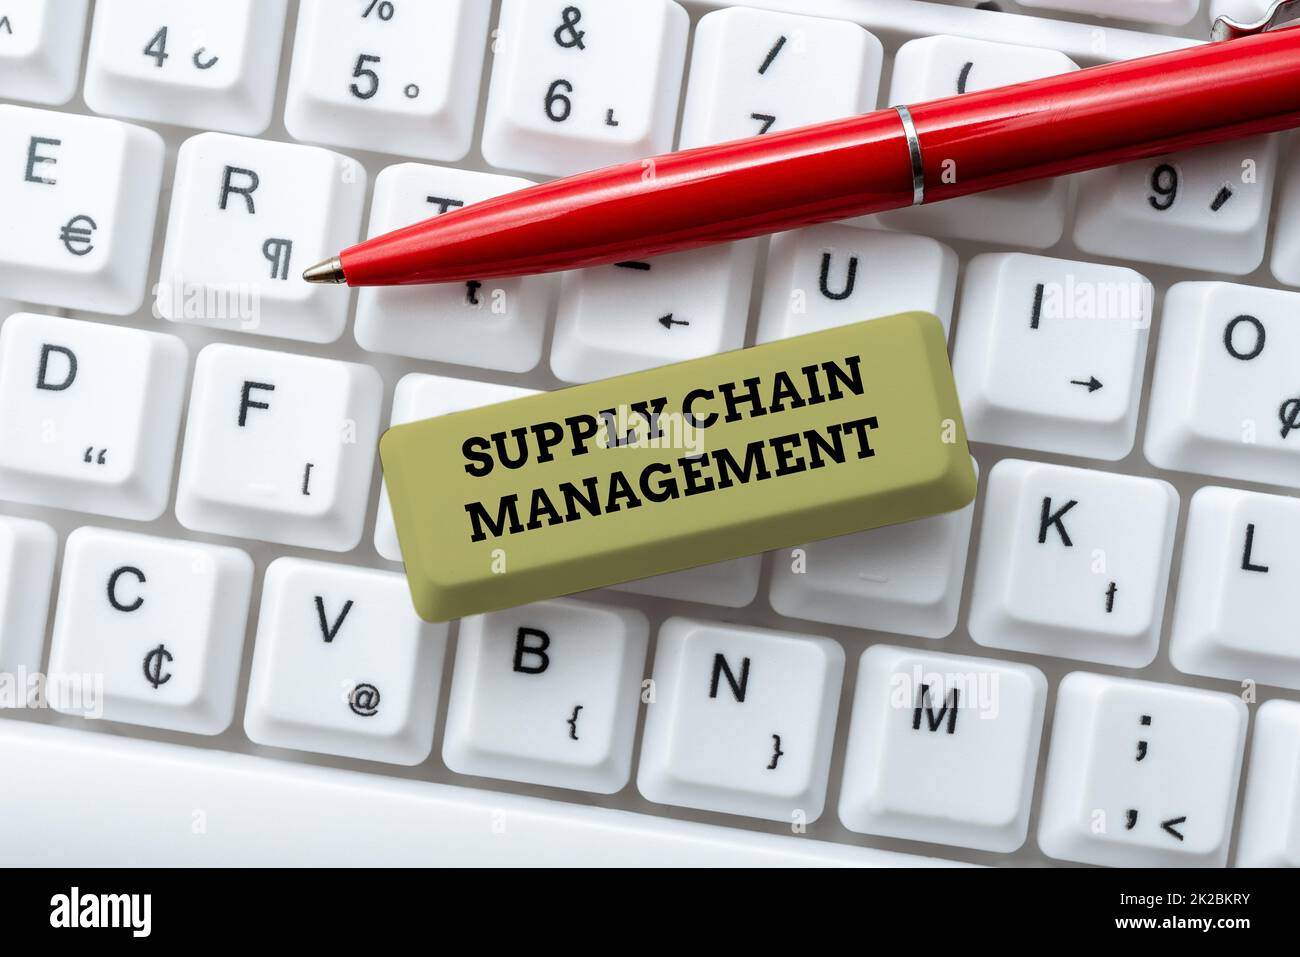 Conceptual display Supply Chain Management. Business concept management of the flow of goods and services Connecting With Online Friends, Making Acquaintances On The Internet Stock Photo